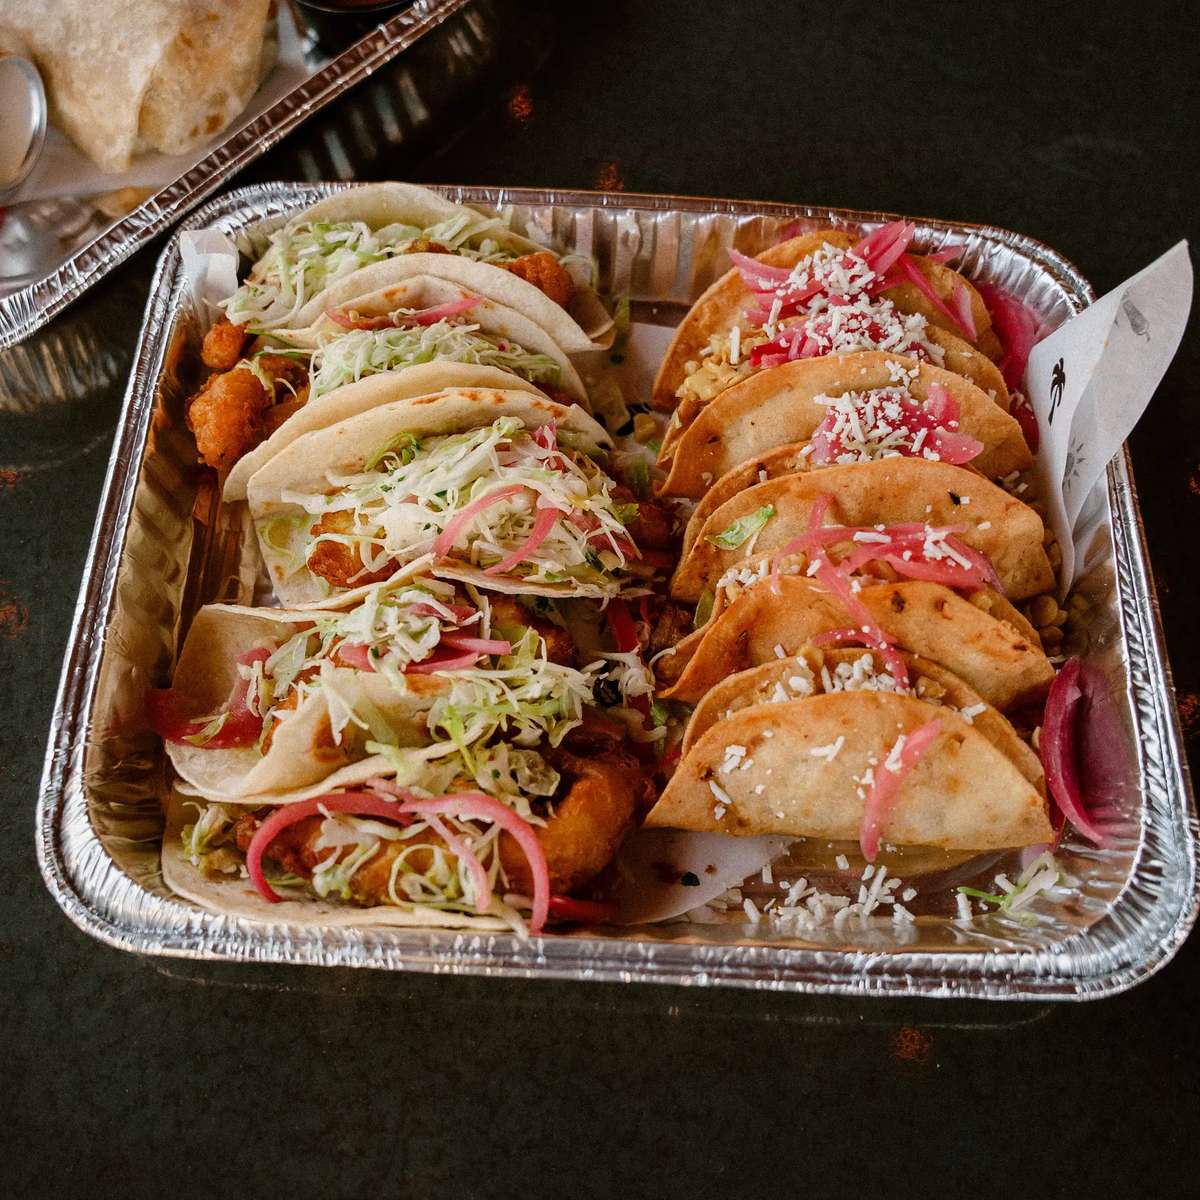 BEST MEXICAN TAKEOUT + TO GO FOOD IN SCOTTSDALE